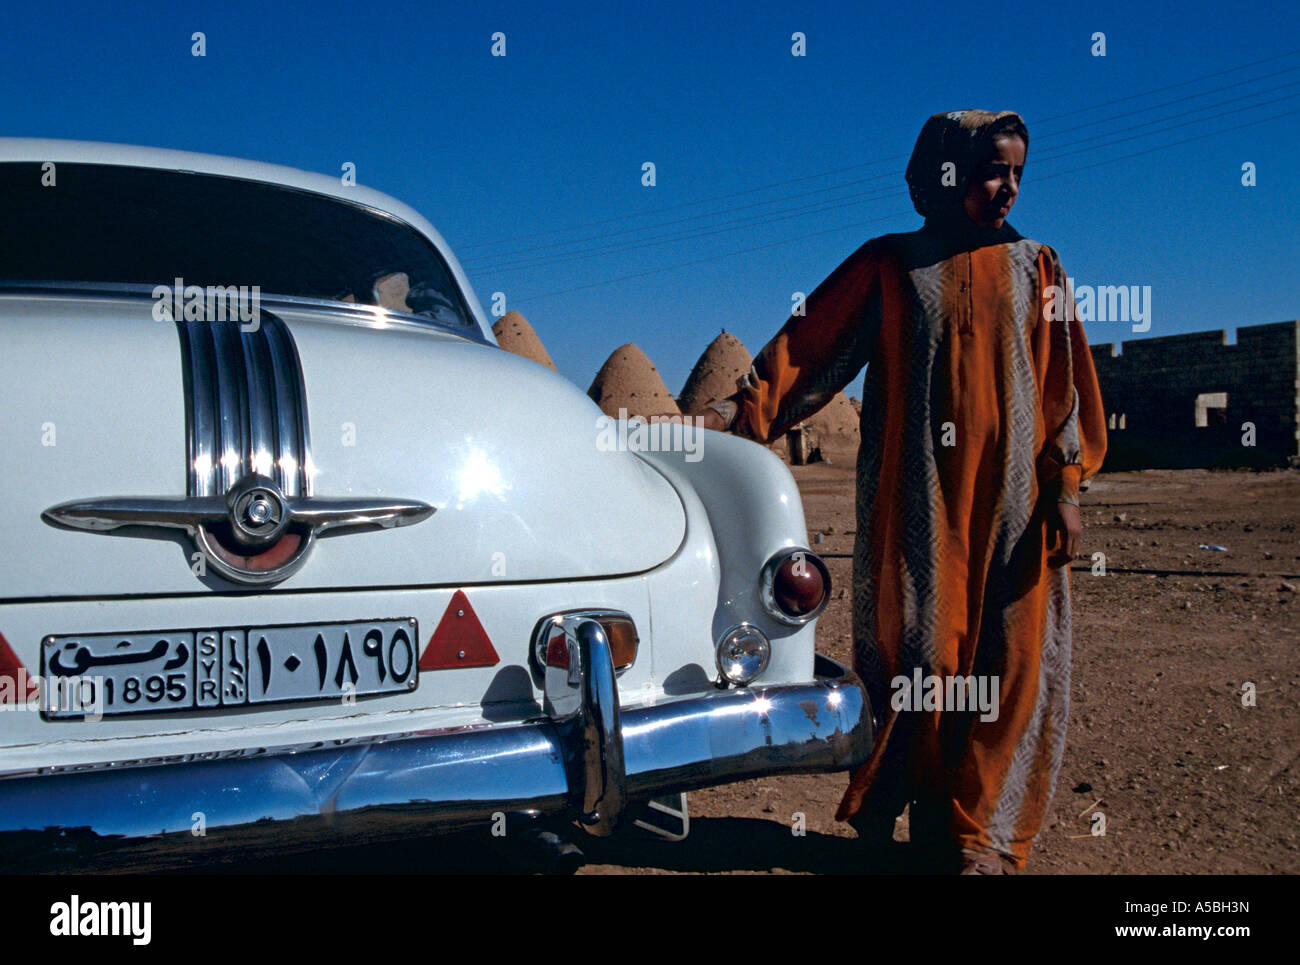 A Syrian woman standing beside a white Cadillac with beehive houses visible in the background Stock Photo